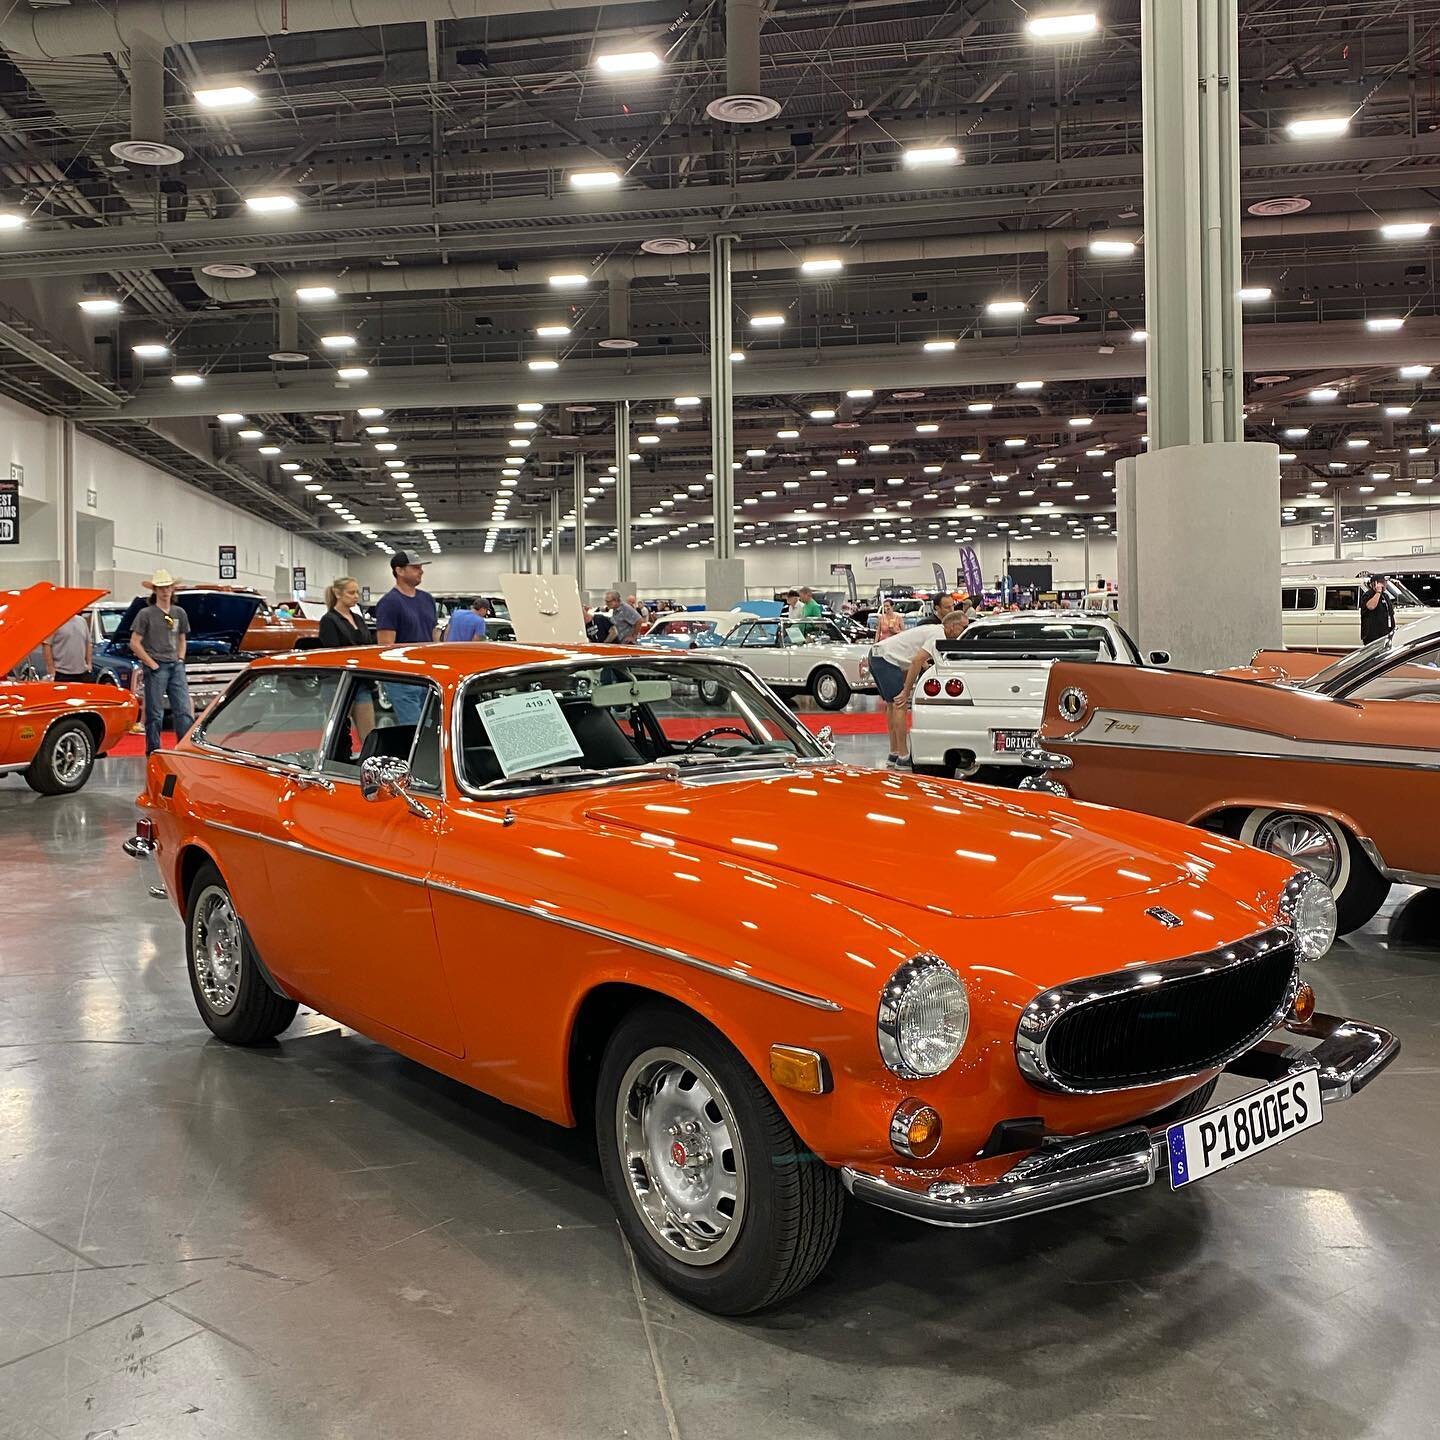 Day 1 @barrett_jackson - we had to start by sharing this wonderfully restored Volvo P1800 ES Sport WAGON!!

What a beautiful car-can&rsquo;t wait to see who takes this one home. 

#daserbecllctv #barrettjackson #lasvegas #volvo #p1800 #classiccars #e